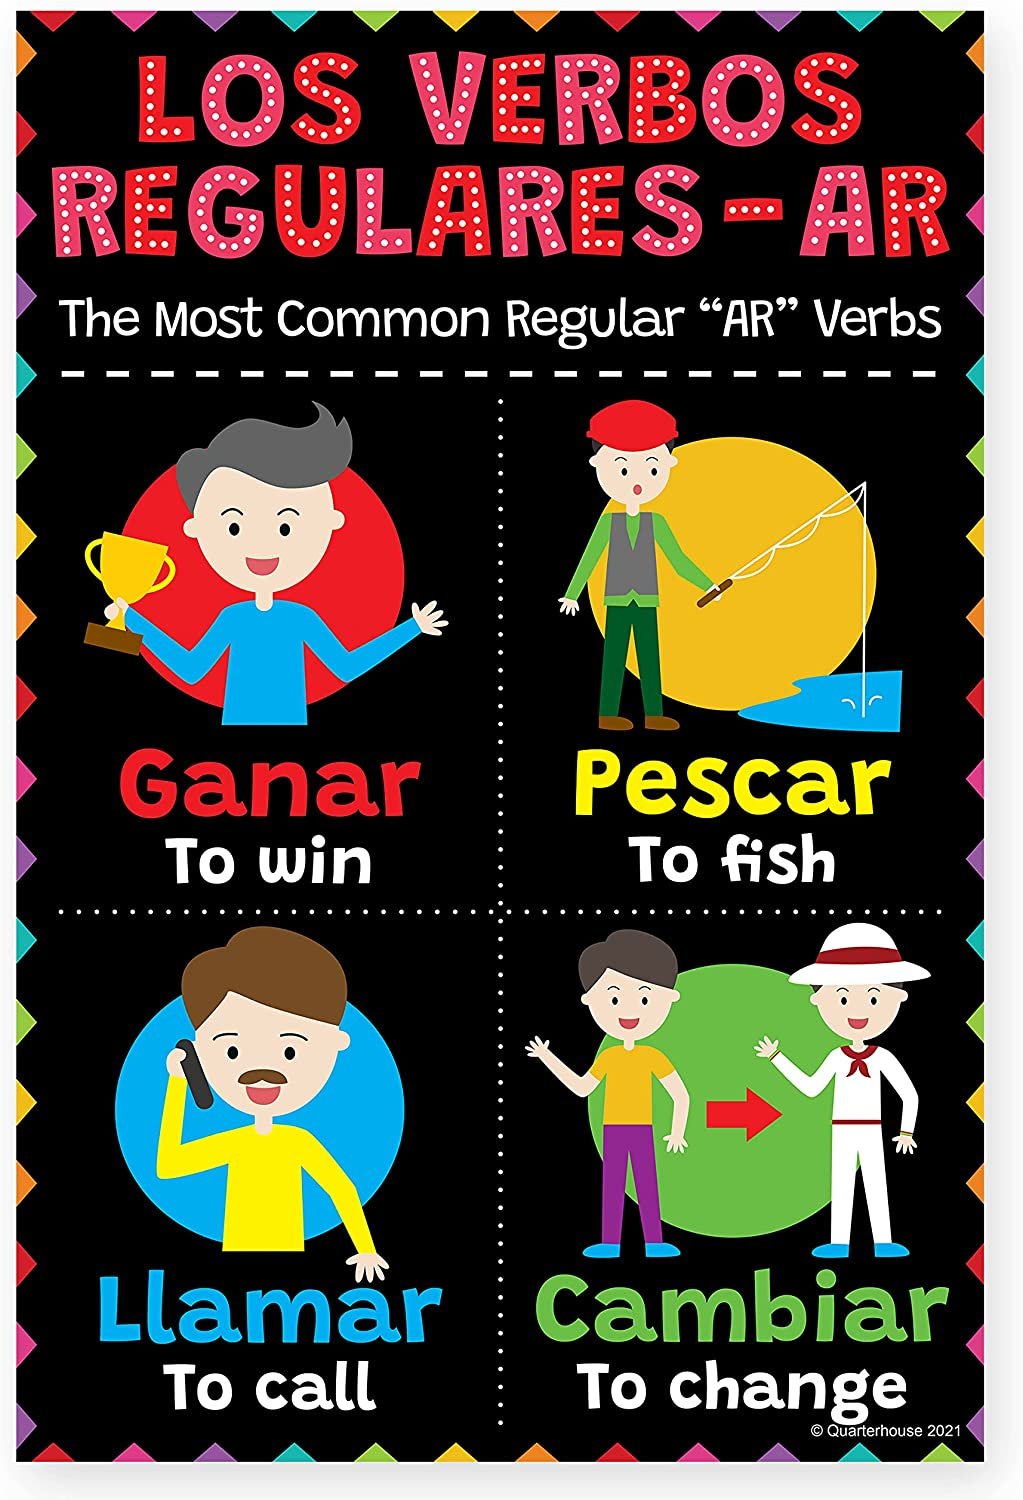 Quarterhouse Spanish Most Common Regular -Ar, -Er, and -Ir Verbs Poster Set, Spanish - ESL Classroom Learning Materials for K-12 Students and Teachers, Set of 6, 12 x 18 Inches, Extra Durable